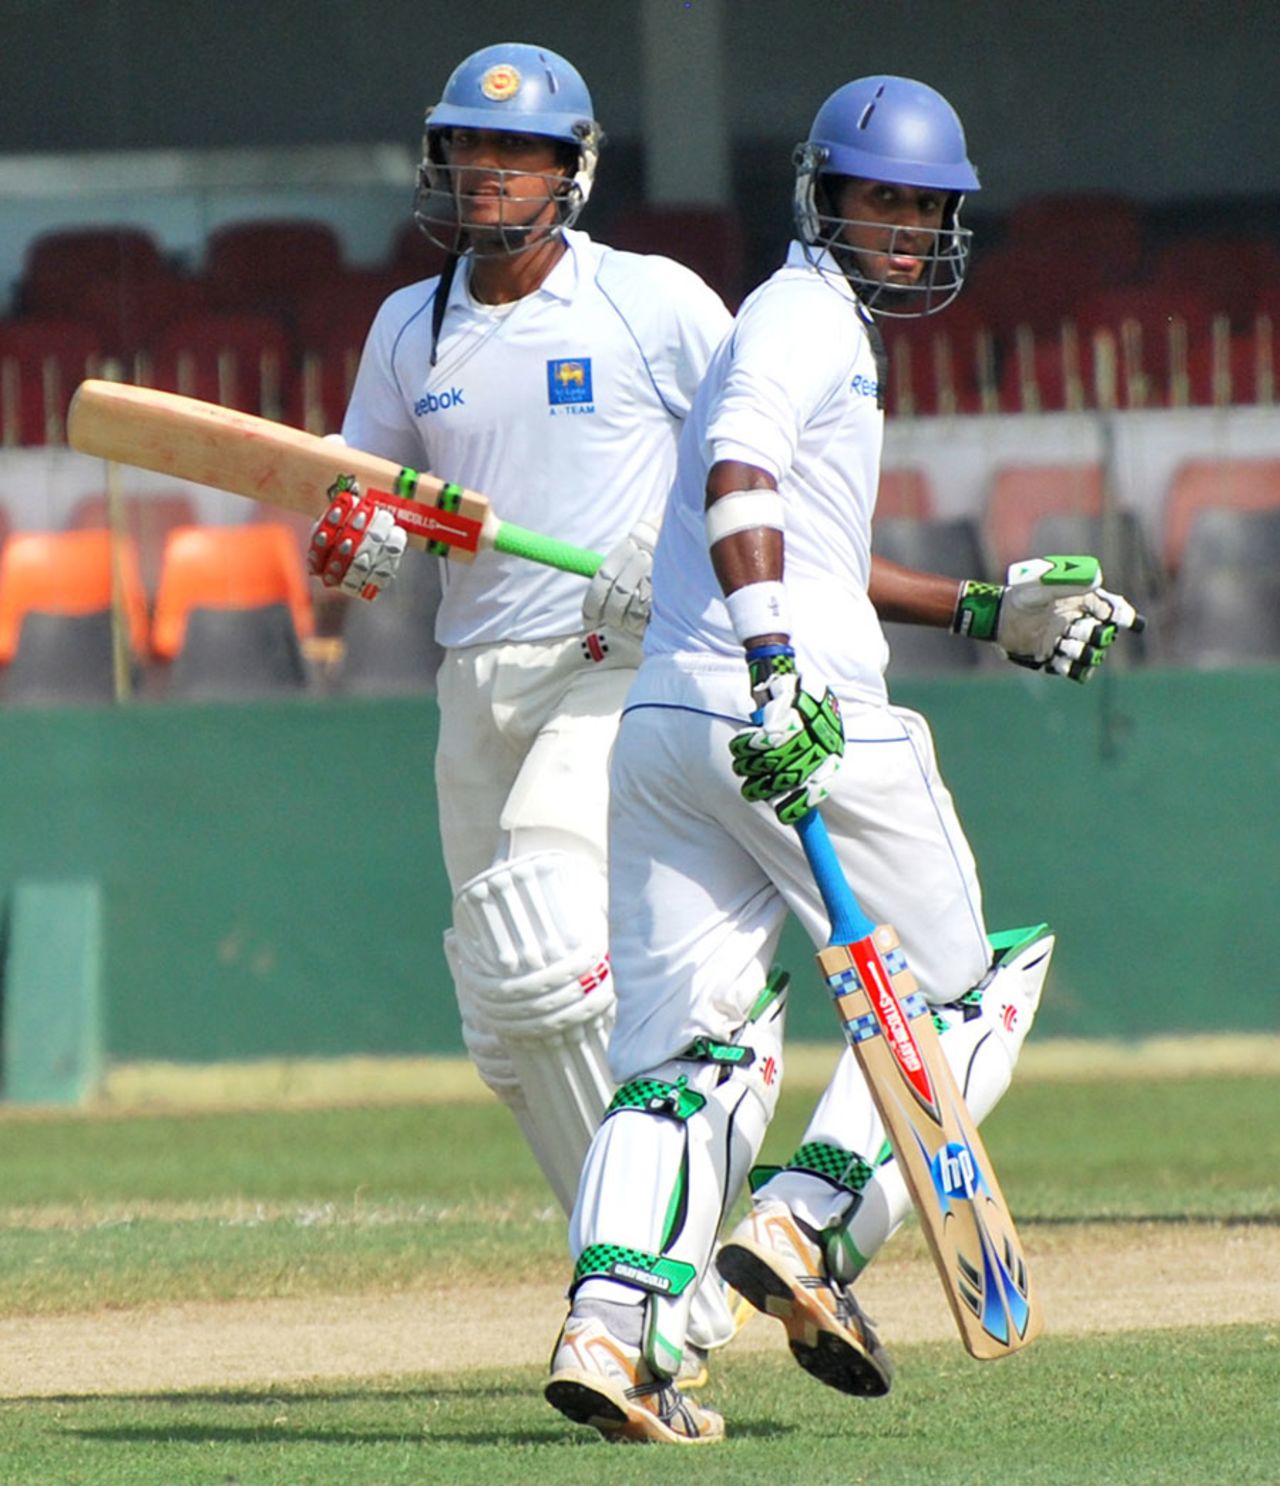 Dimuth Karunaratne and Dinesh Chandimal added 369 runs, Sri Lanka A v South Africa A, 2nd unofficial Test, SSC, August 18, 2010